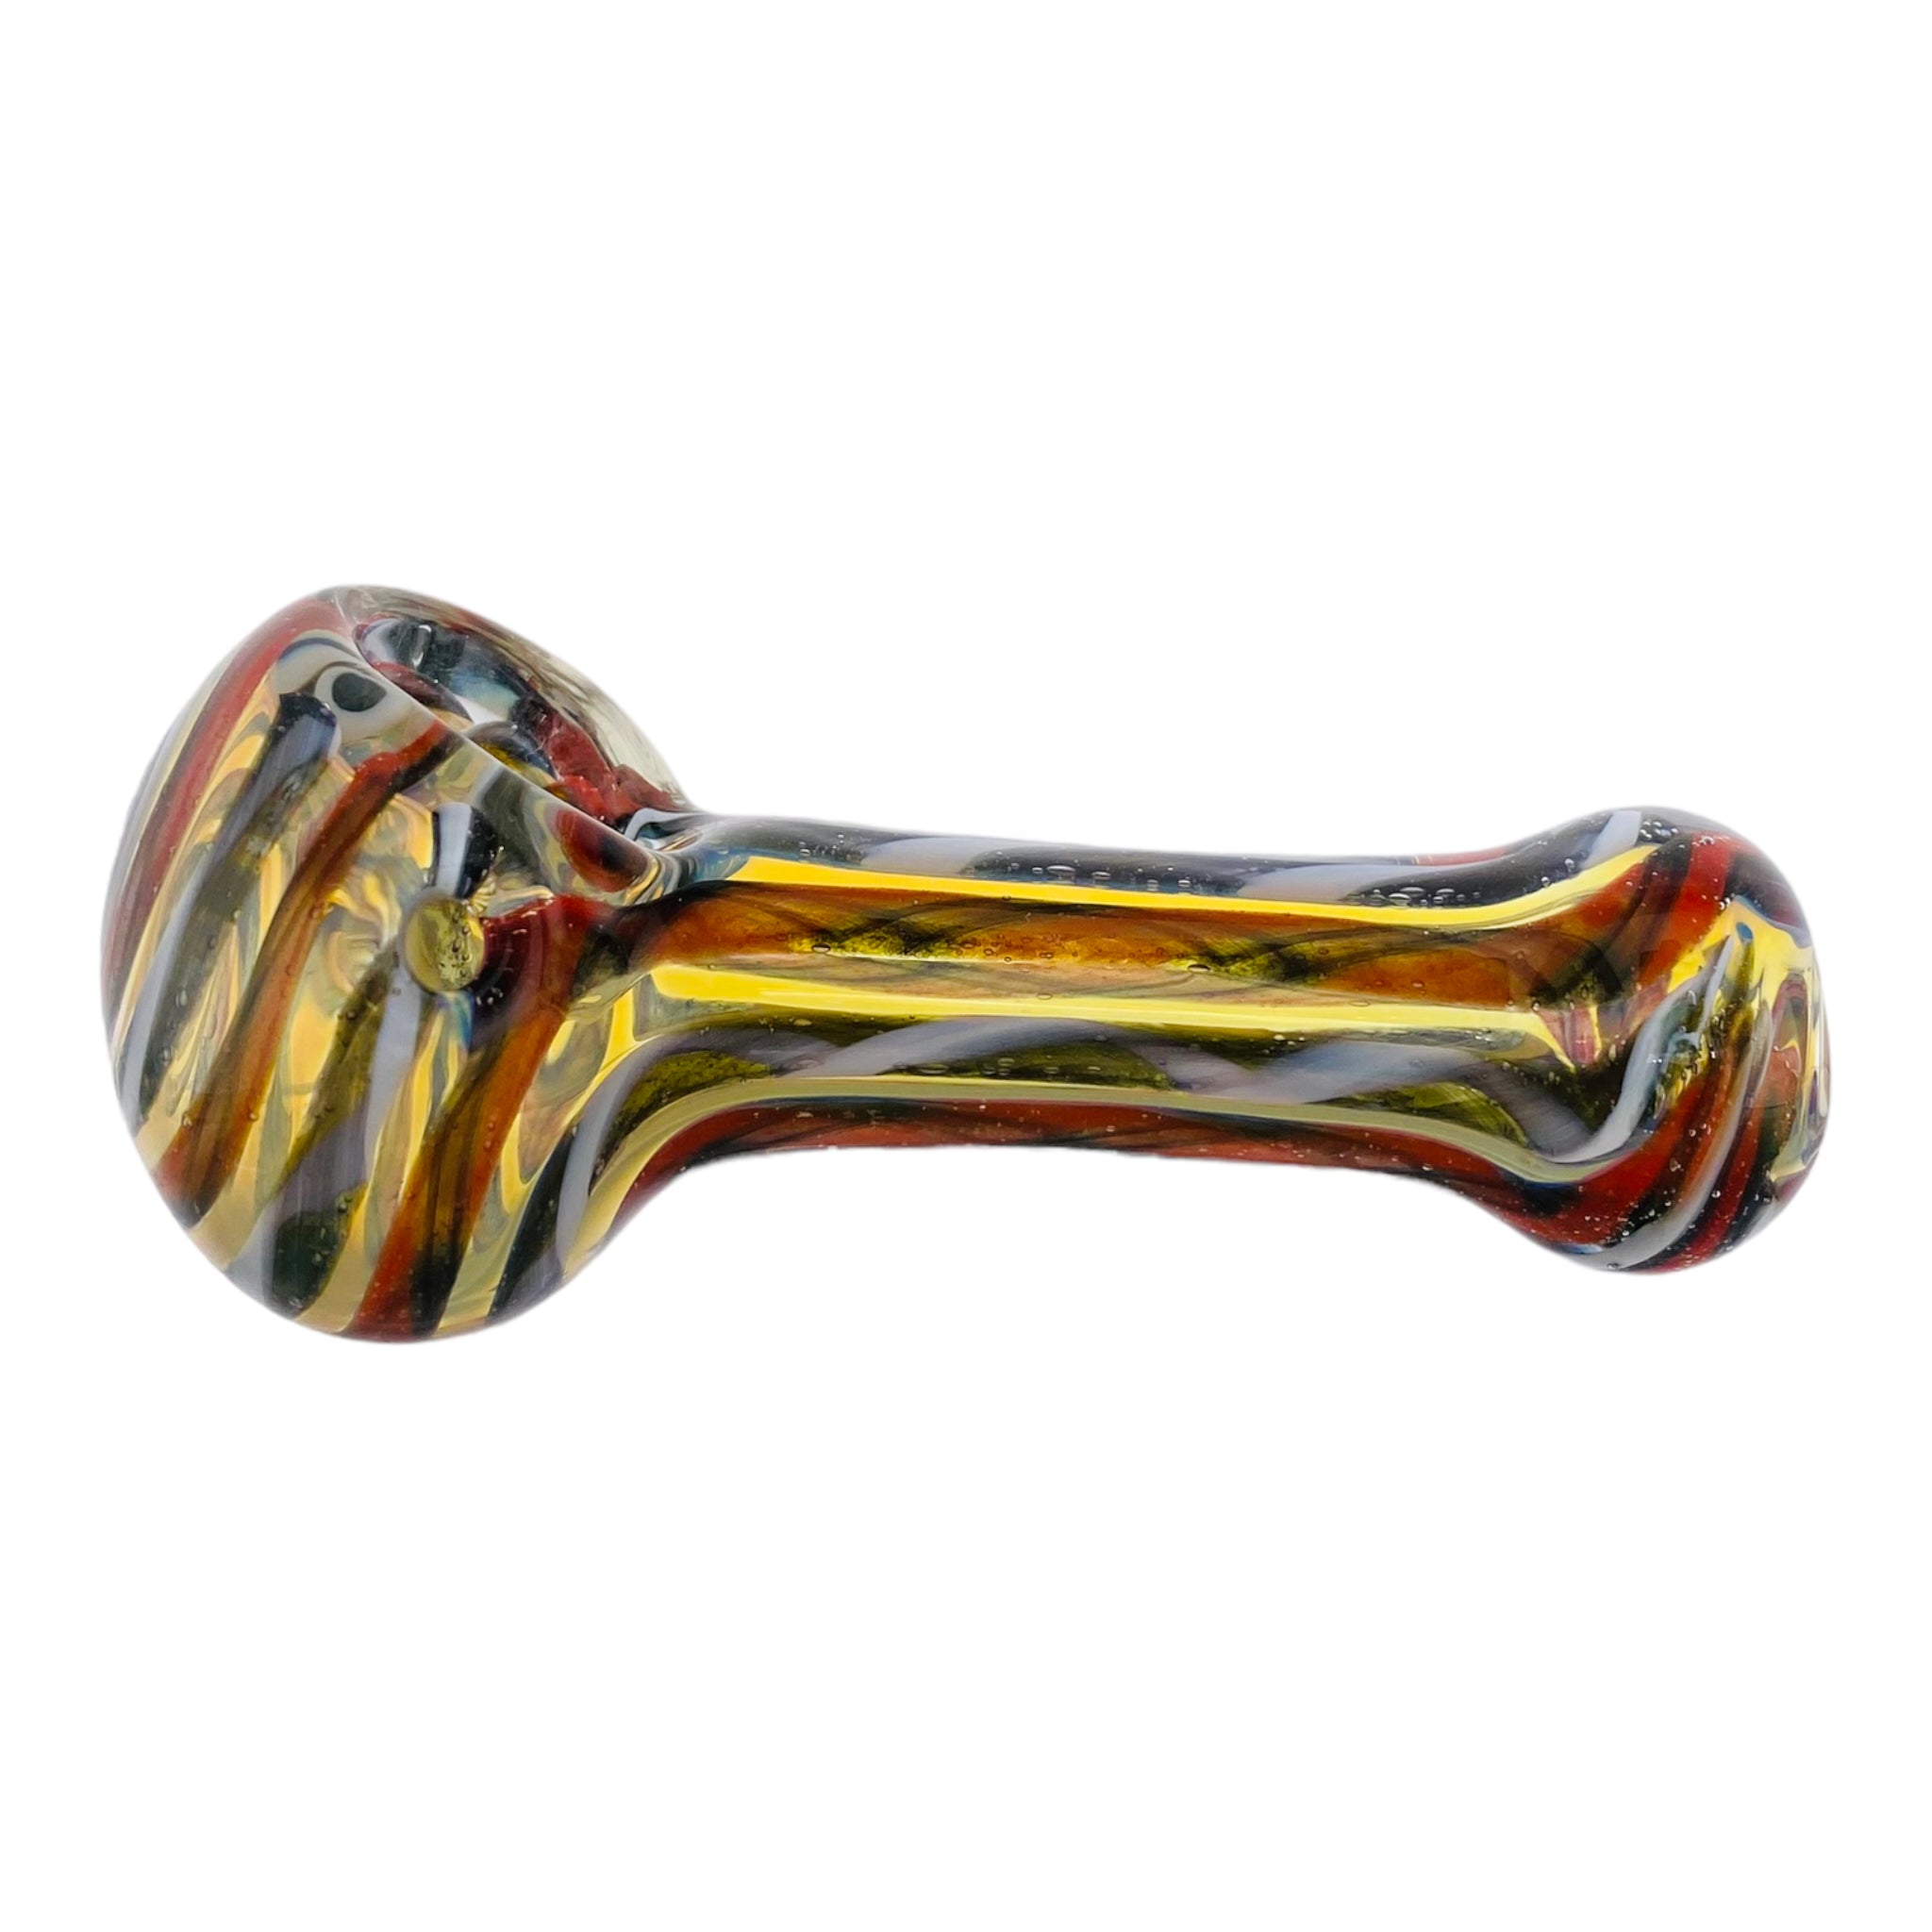 Basic Glass Spoon Pipe With Red White And Black Linework